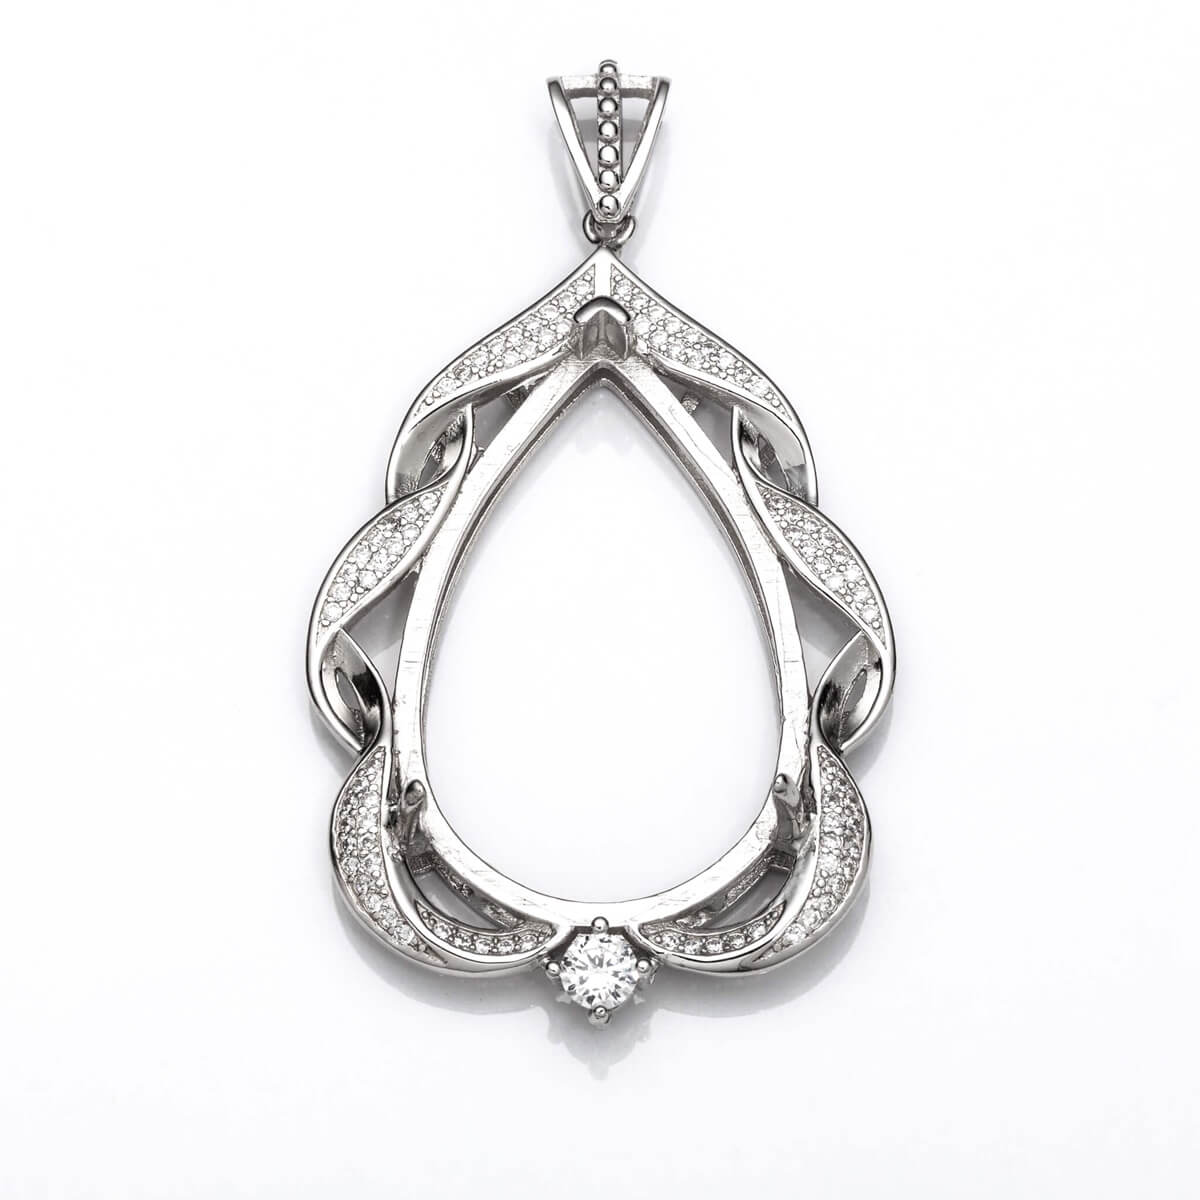 Pear Pendant with Cubic Zirconia Inlays and Pear Shape Mounting and Bail in Sterling Silver 24x36mm